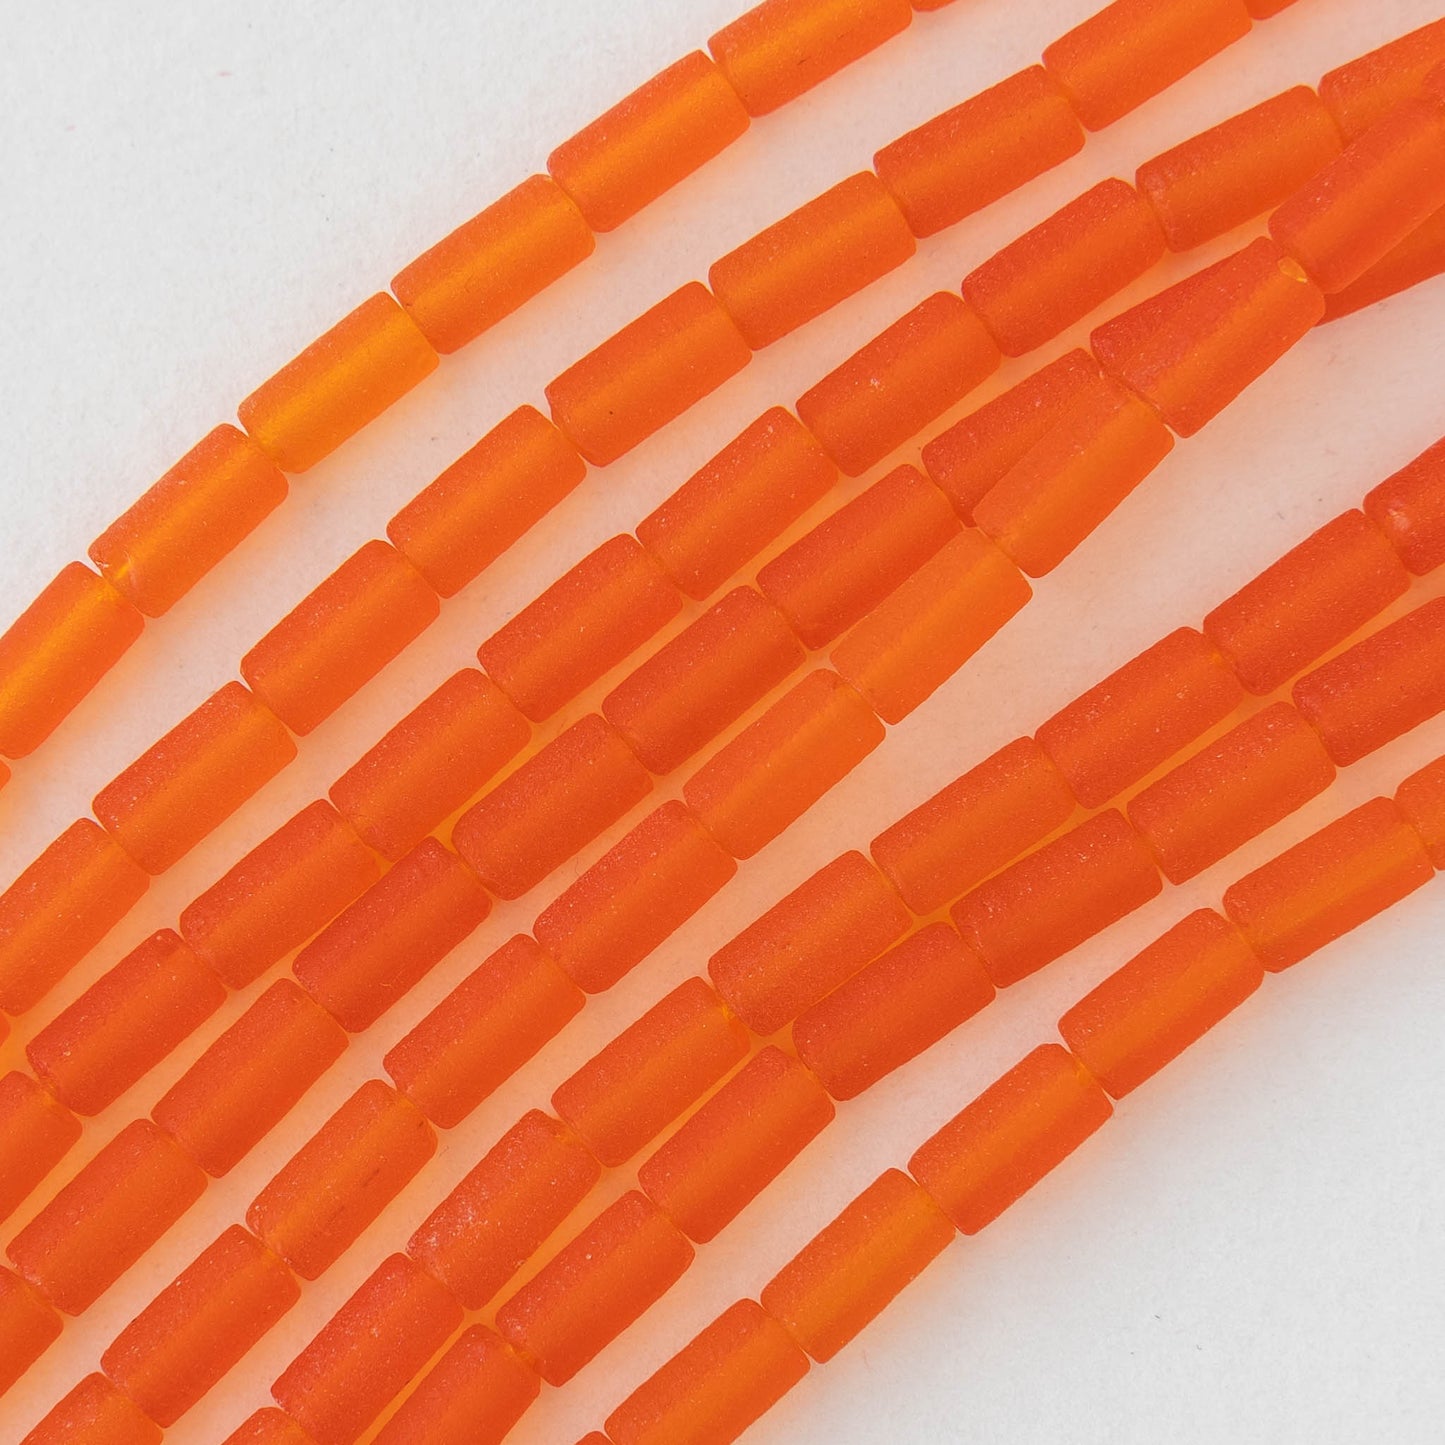 4x9mm Frosted Glass Tube Beads - Orange - 48 Beads